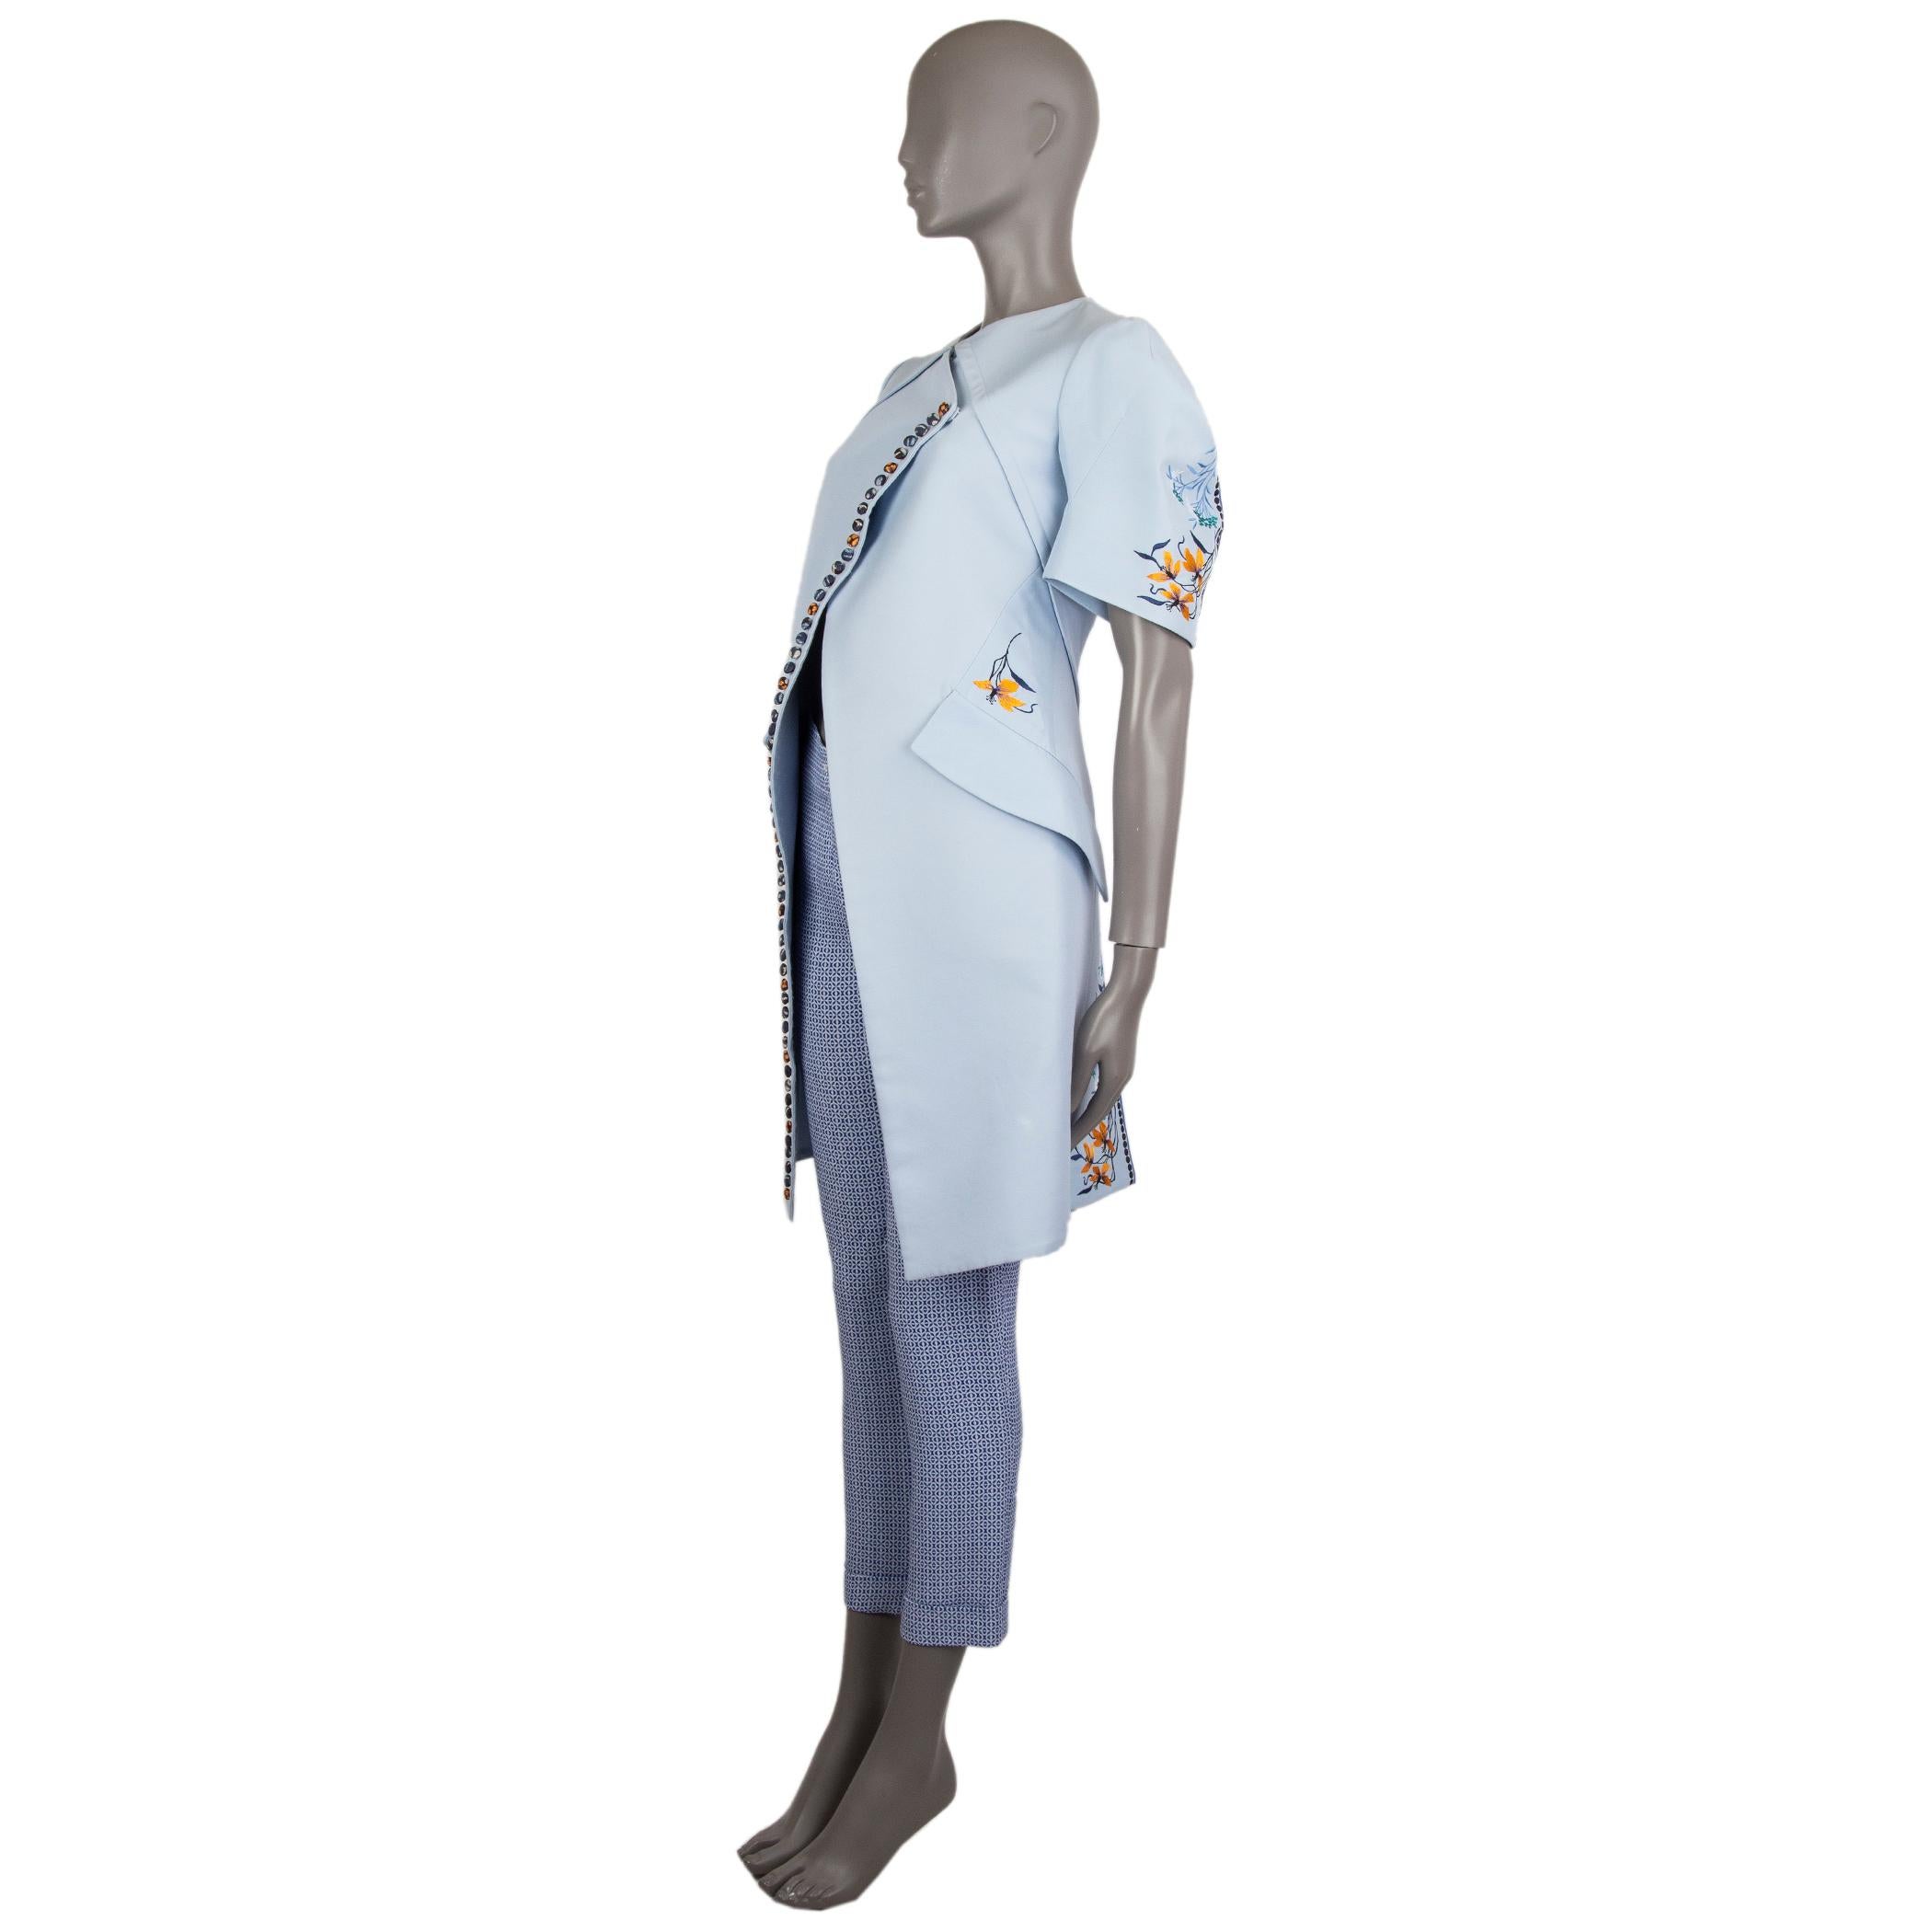 Christian Dior short-sleeve coat in pale blue cotton (62%) and silk (38%). With flower embroideries, diagonal double-breasted front, v neck, decorative fabric buttons down the front seam, pouf sleeves, two flap pockets on the sides, and box pleating